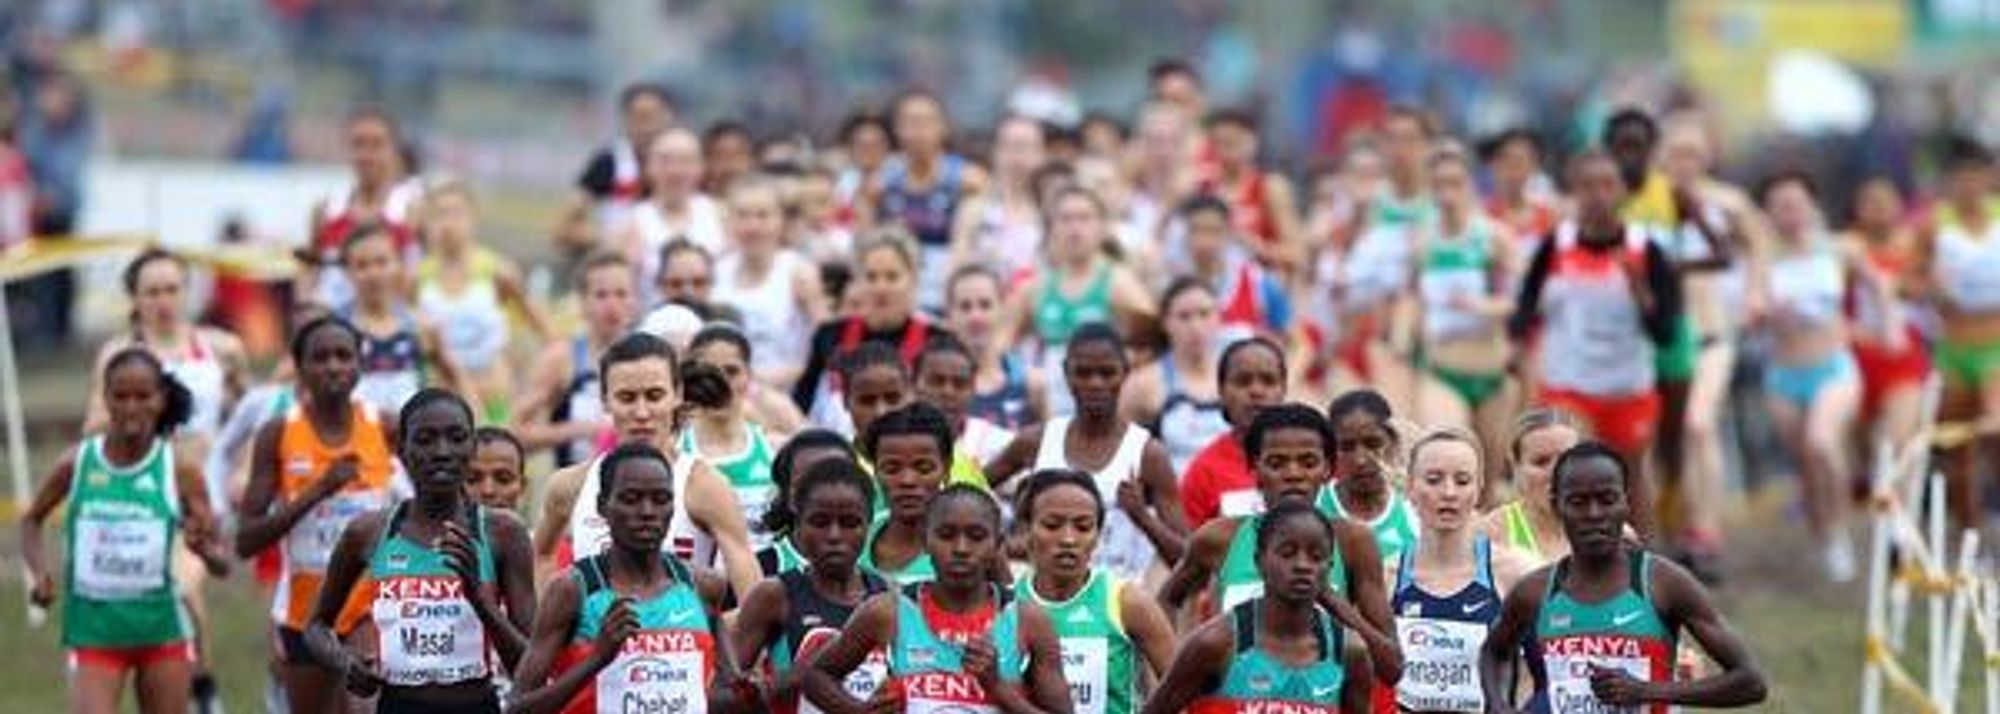 There would be no denying of a Kenyan festival at the IAAF World Cross Country Championships here in Bydgoszcz as for the first time since 1994 the East African nation won all gold medals at stake, four individual and four team titles.